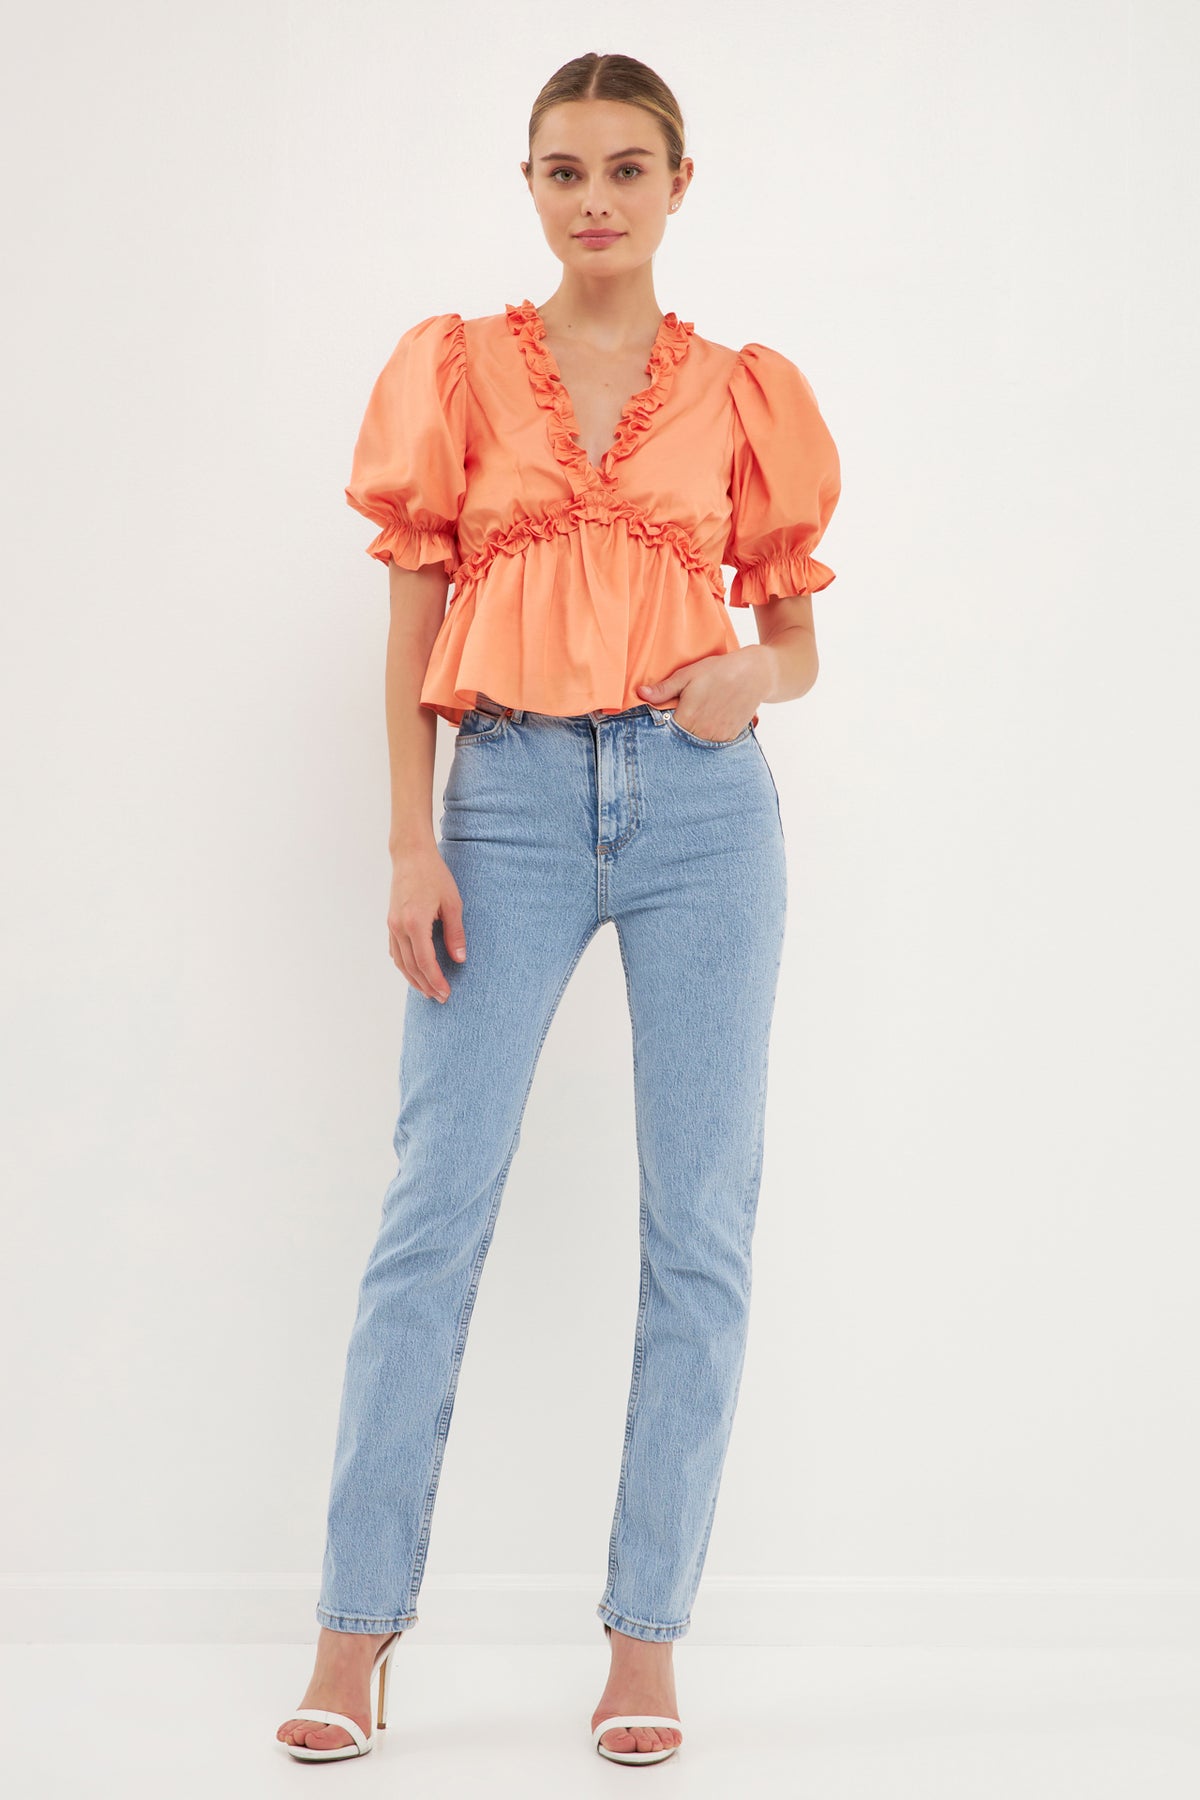 ENDLESS ROSE - Ruffle Detail Top with Puff Sleeves - TOPS available at Objectrare